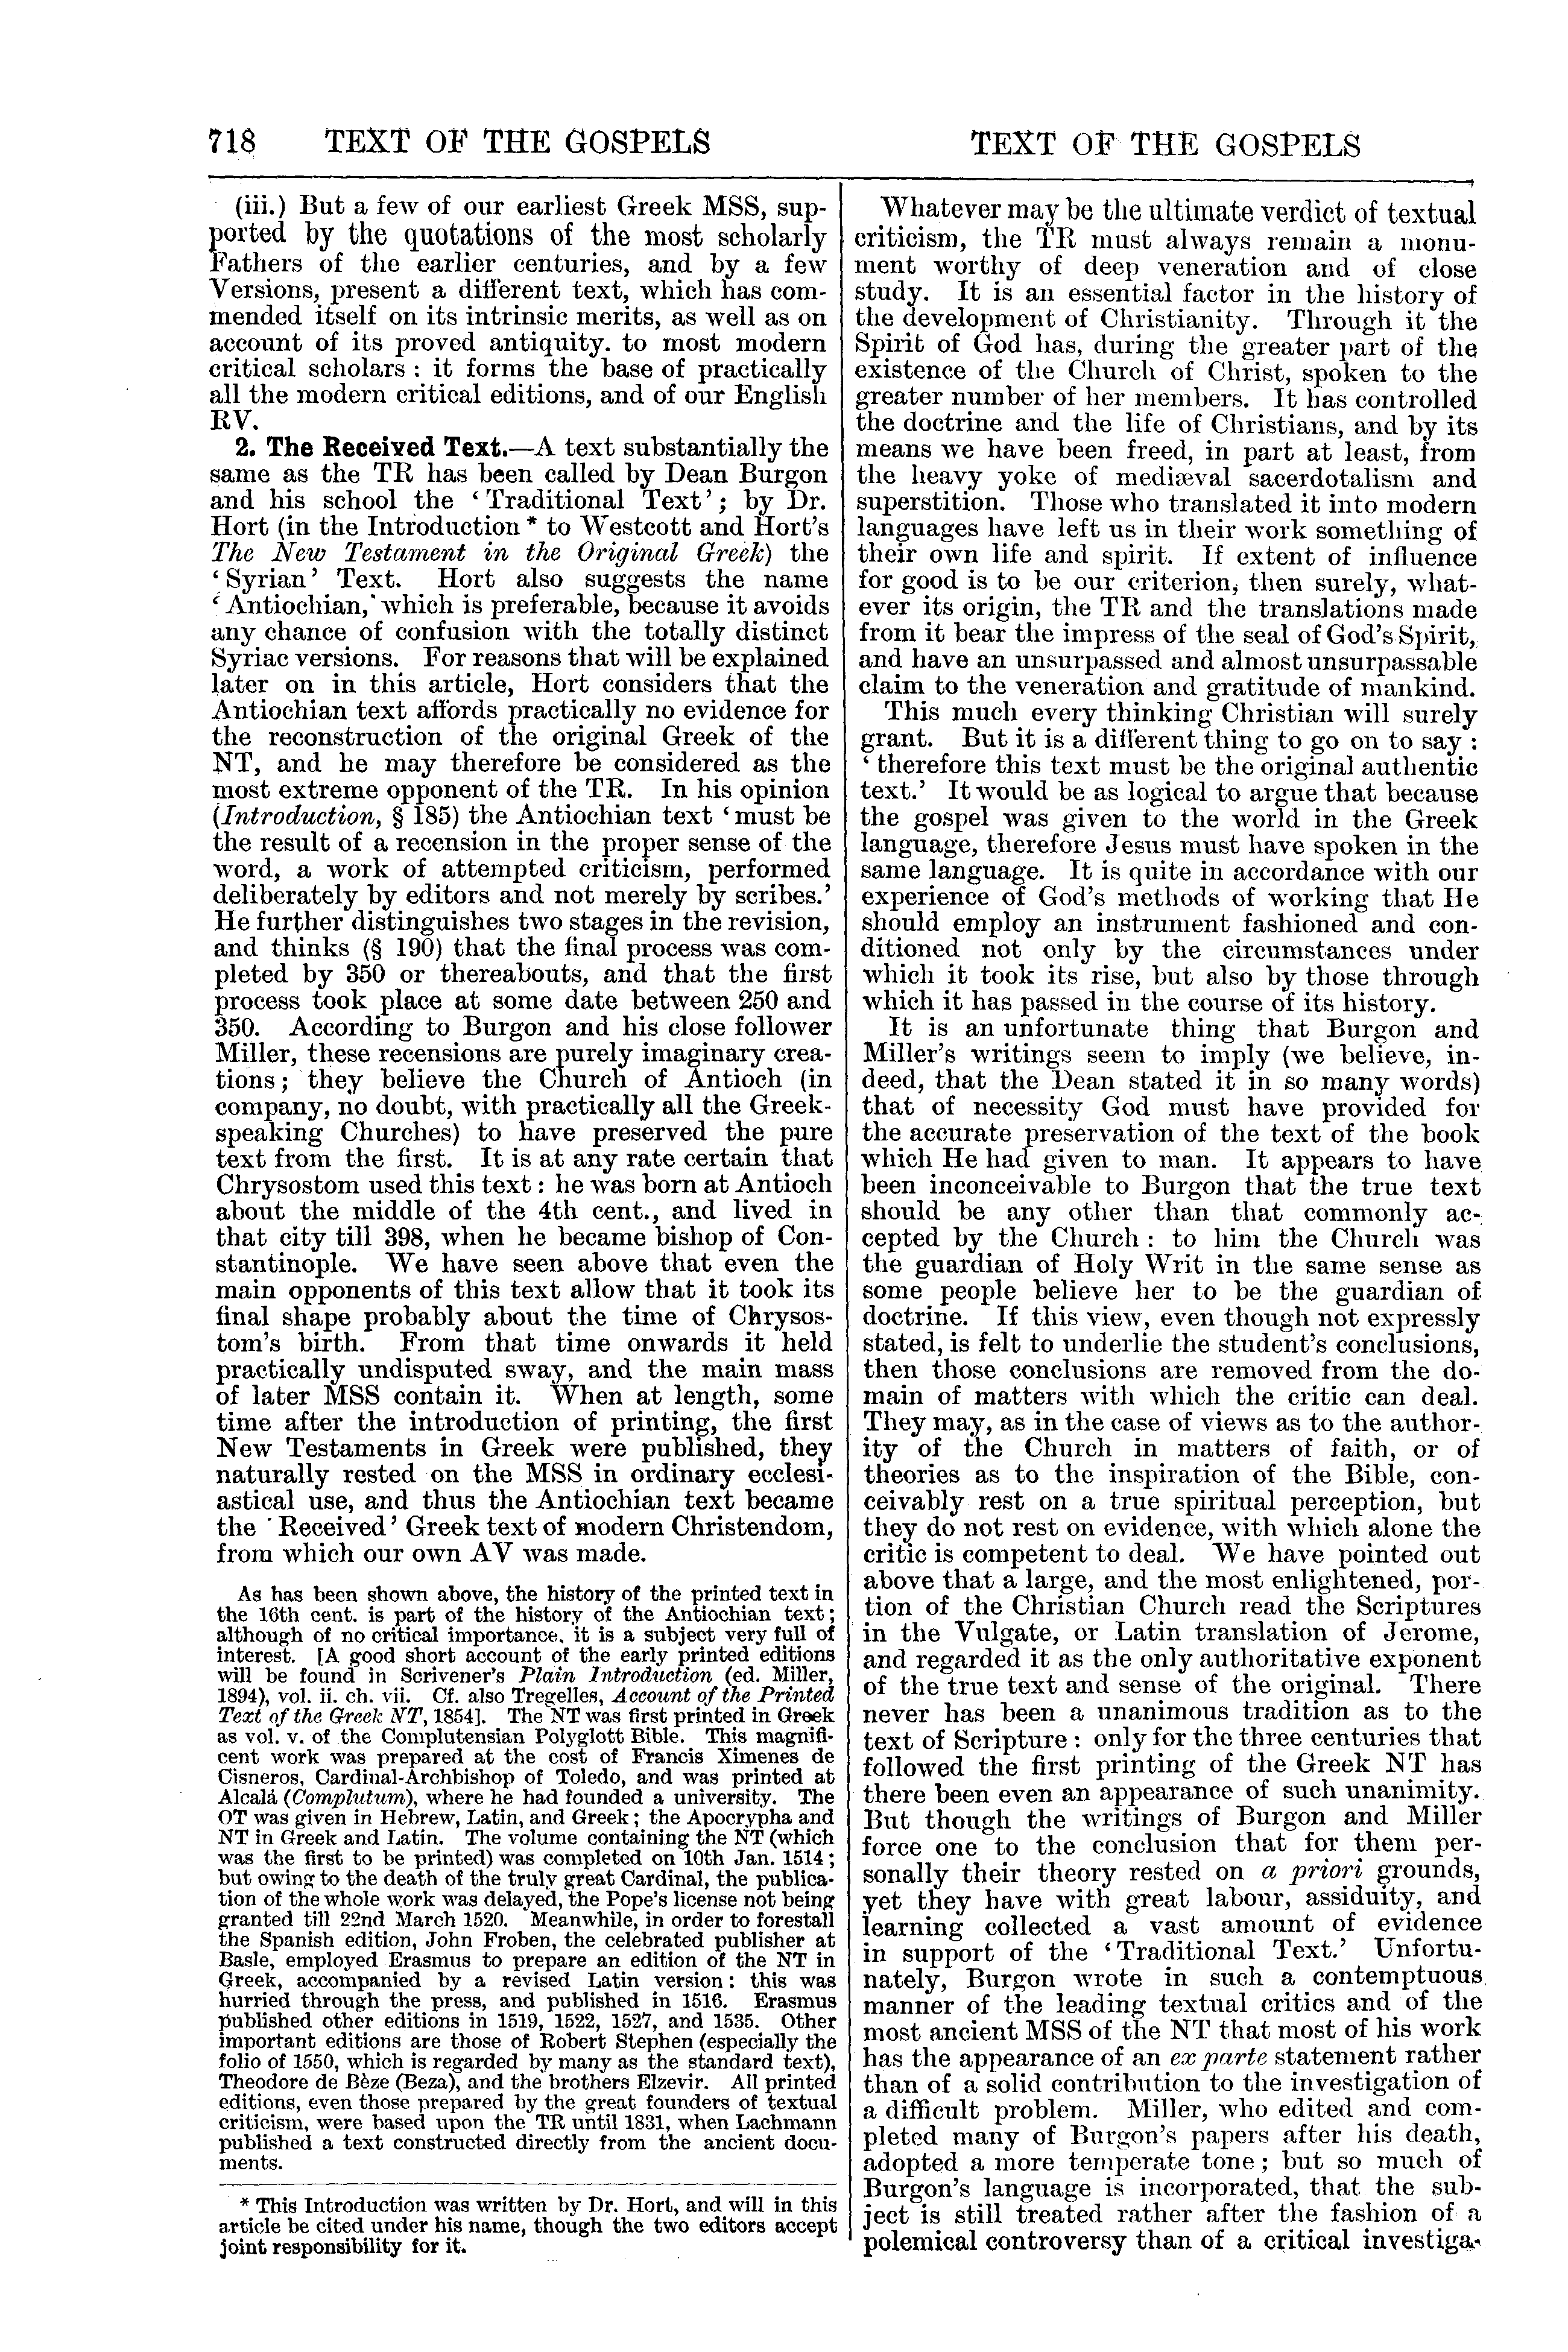 Image of page 718